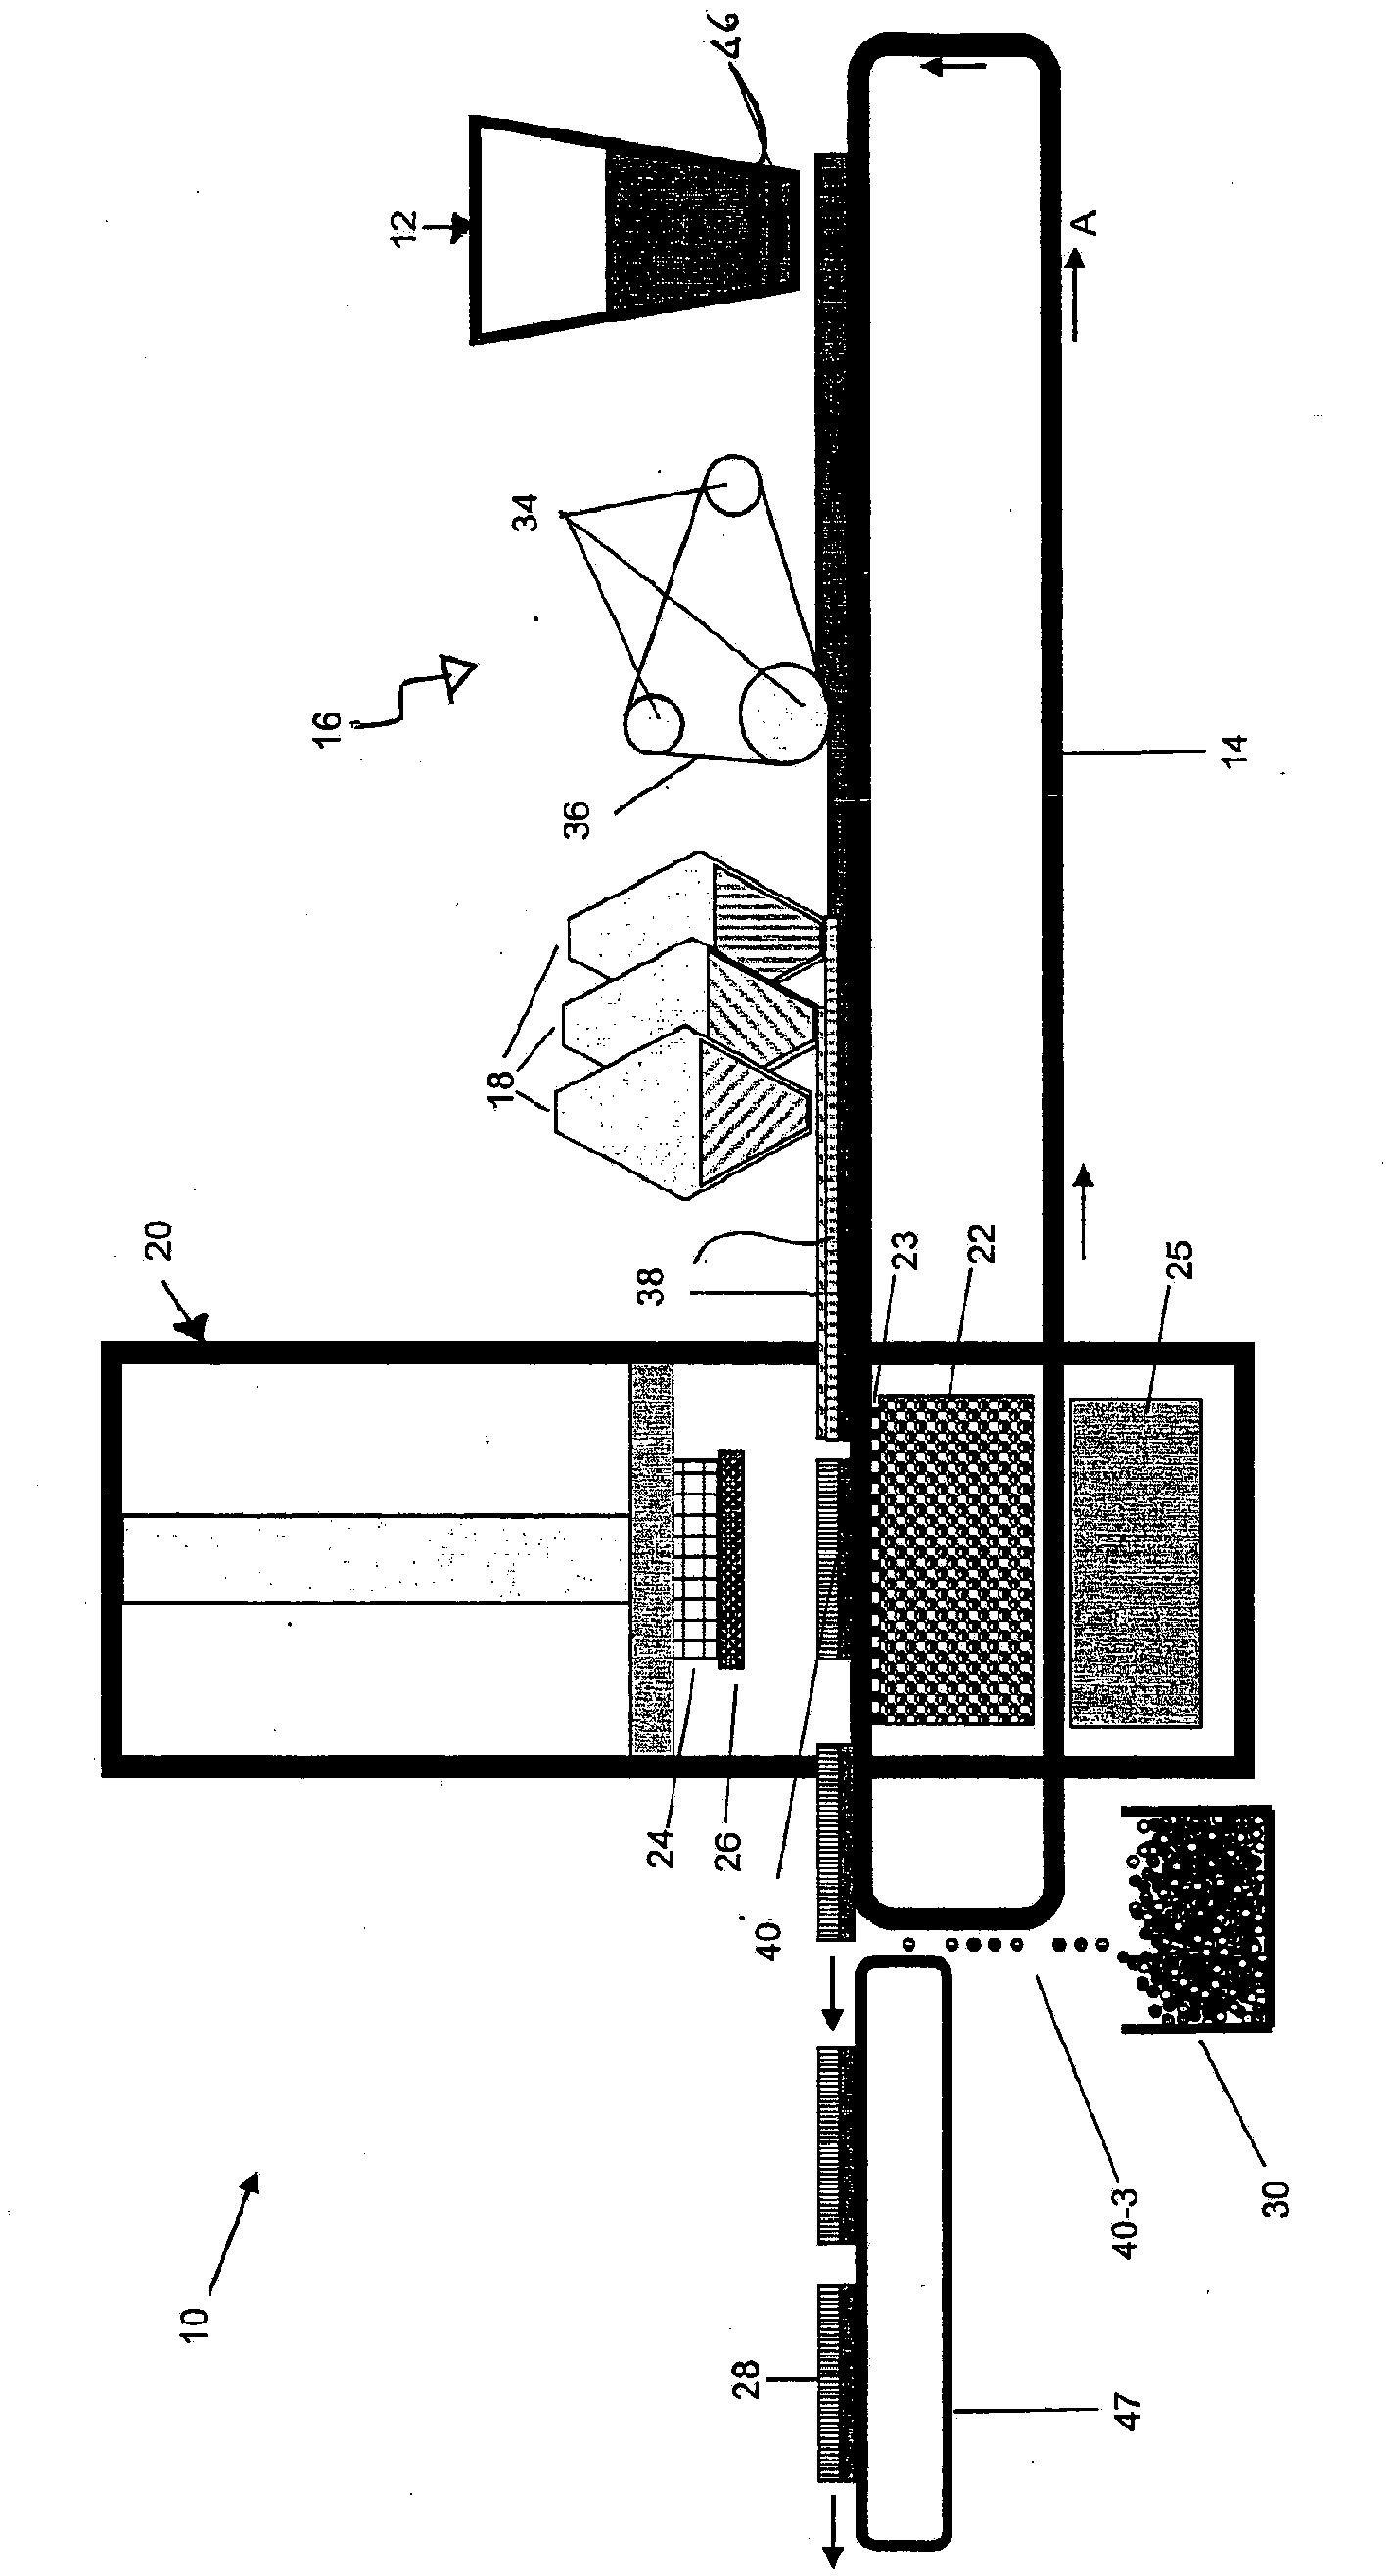 Apparatuses, system and methods for forming pressed articles and pressed articles formed thereby